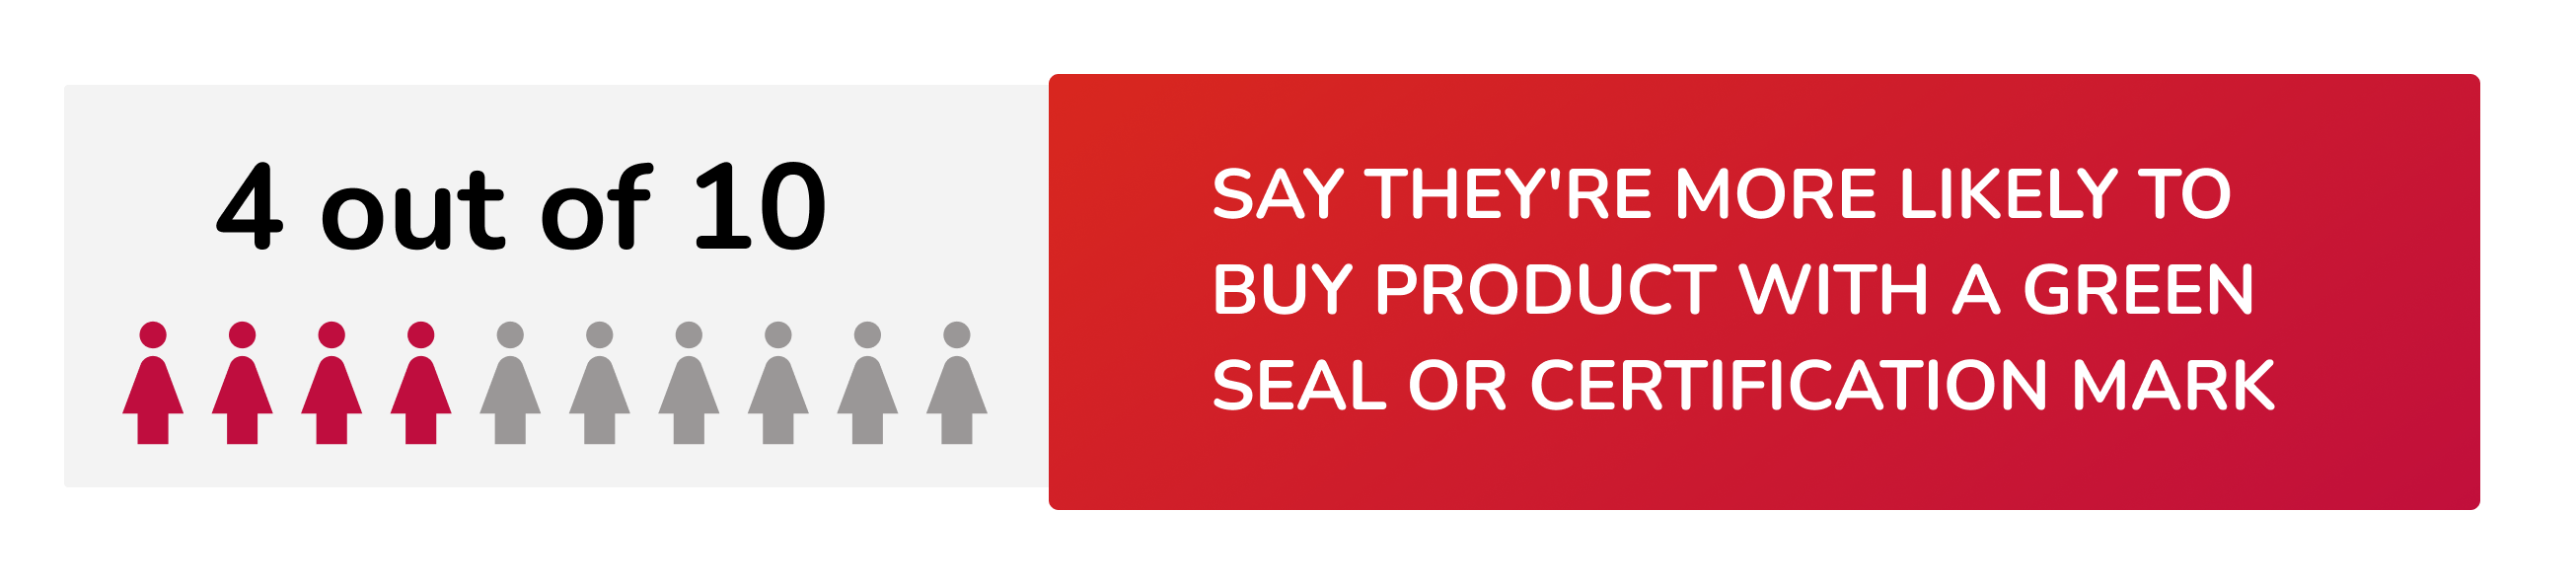 4 out of 10 say they're more likely to buy product with a green seal or certification mark 